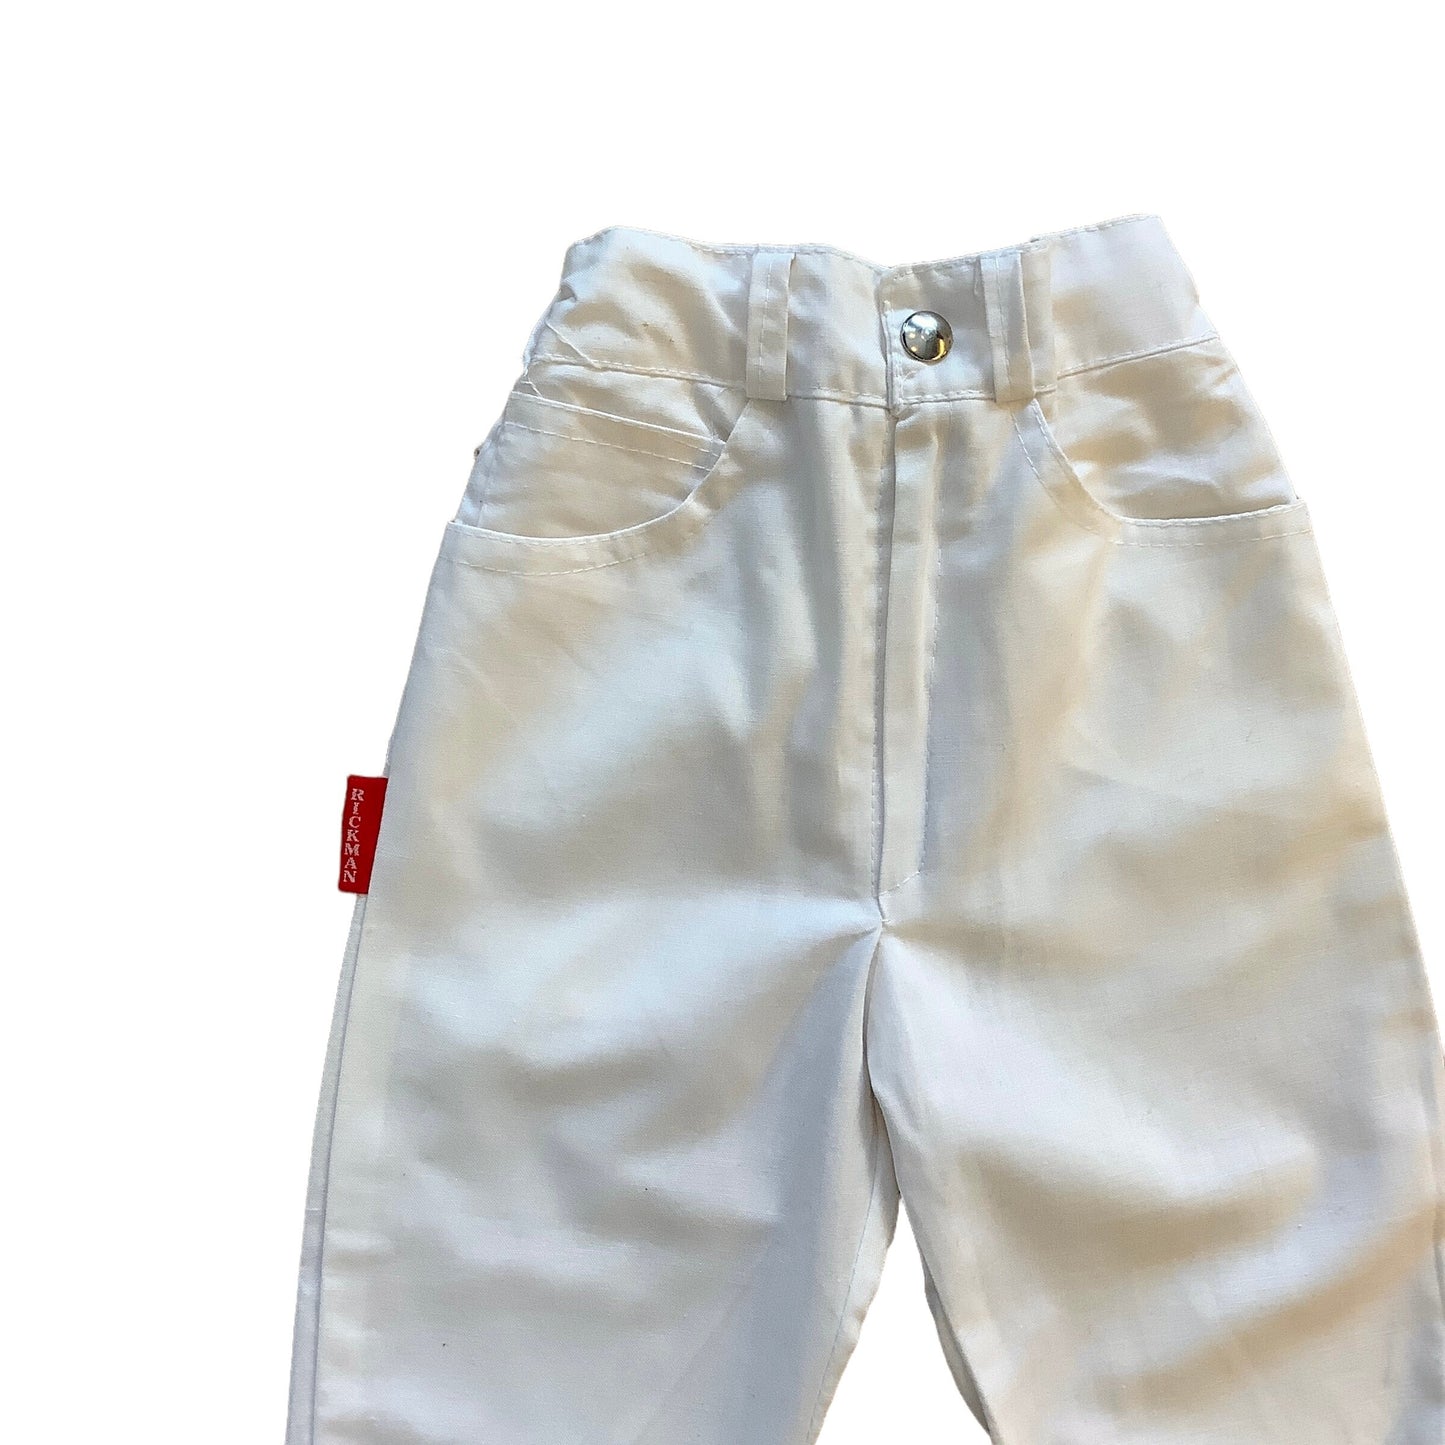 Vintage 1970s White Toddler "Cigarette" Trousers 12-18 Months